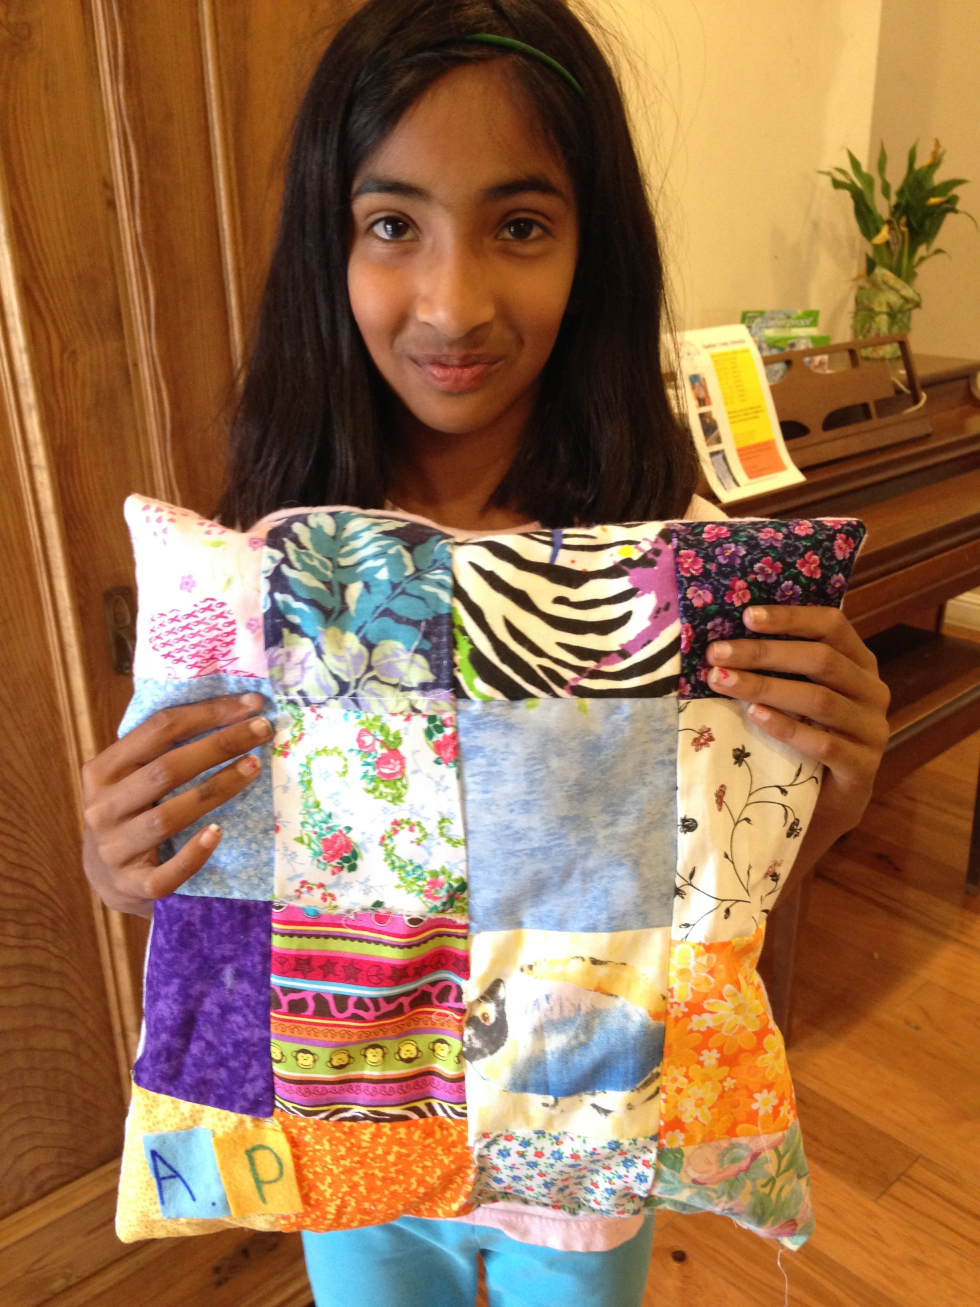  Finished pieced quilted pillow by 3rd grader. 